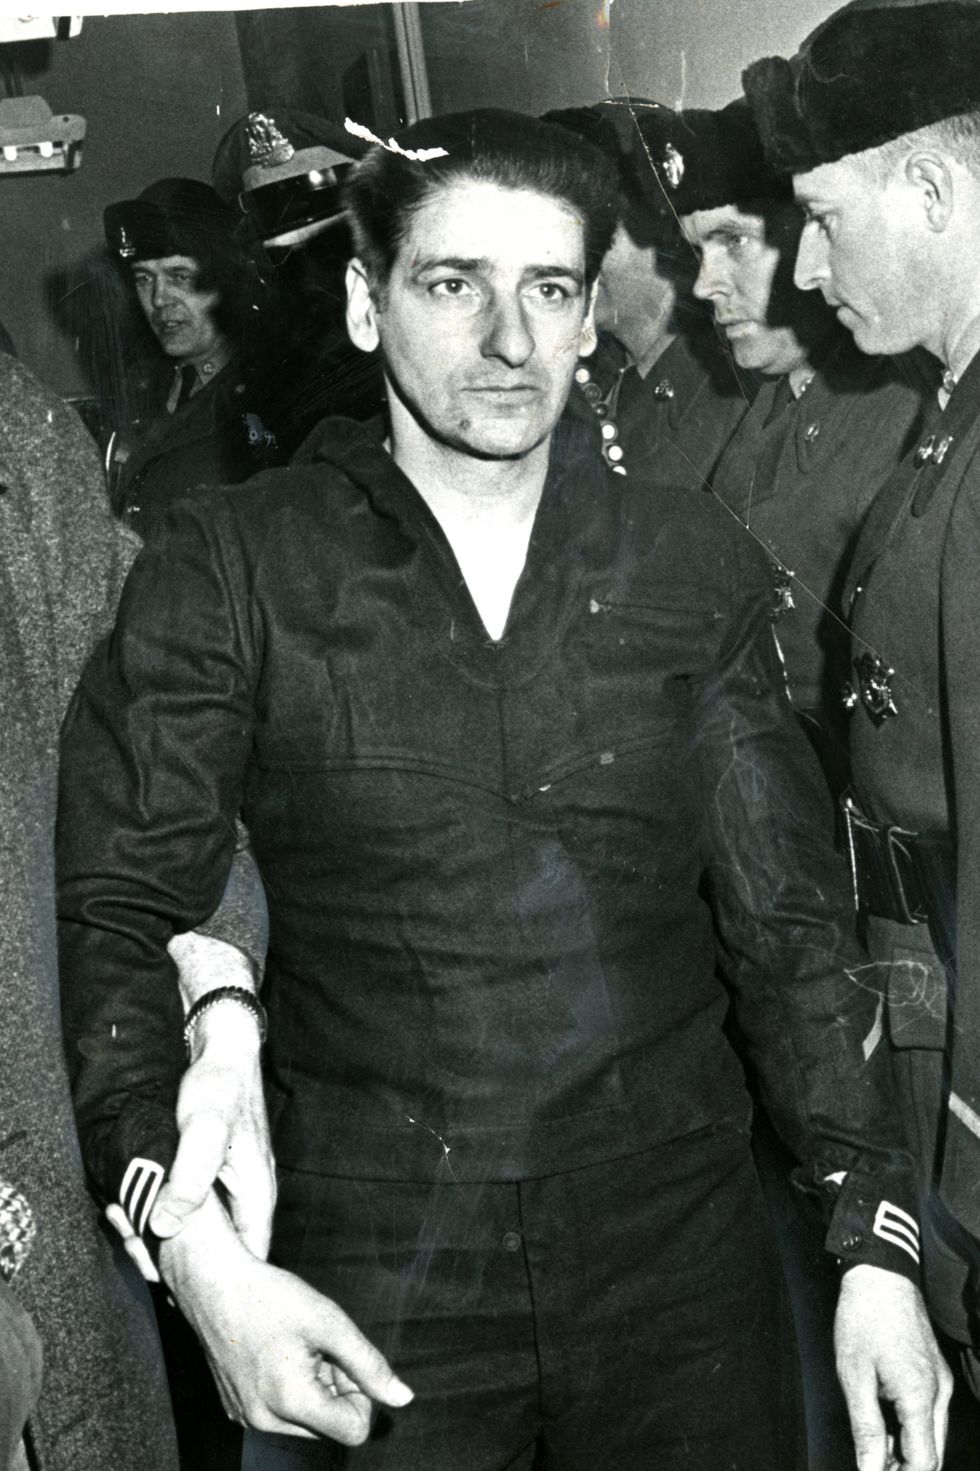 albert desalvo being held at the wrist by another person as he walks forward